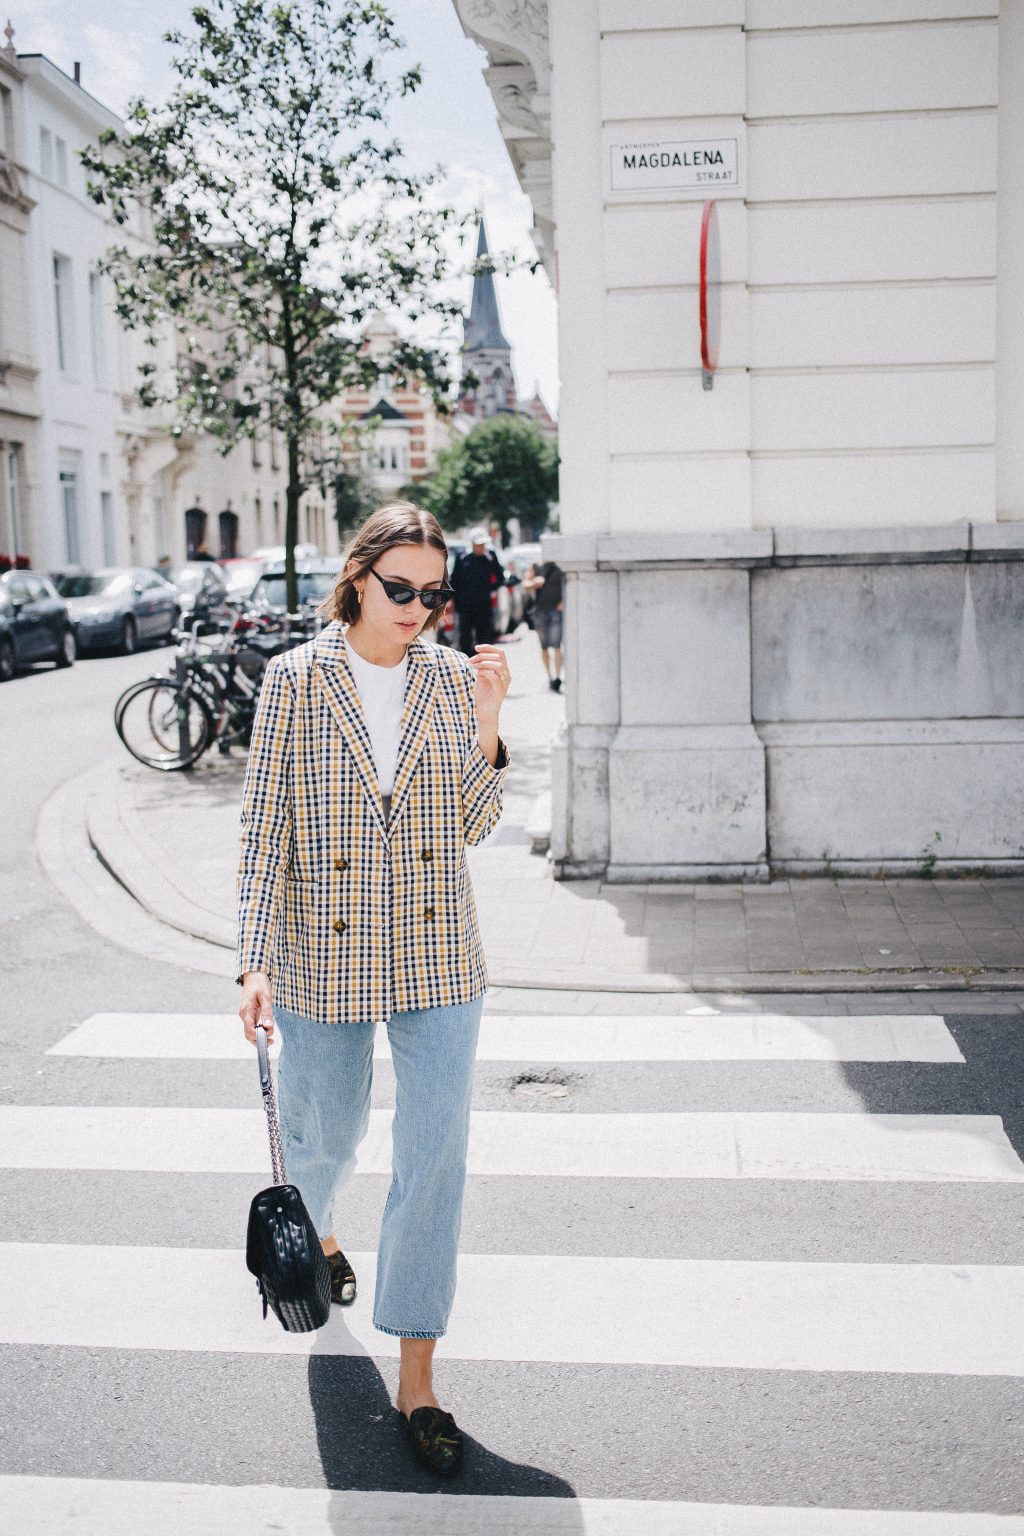 Steal Her Style: Classics for the weekend | Love Daily Dose